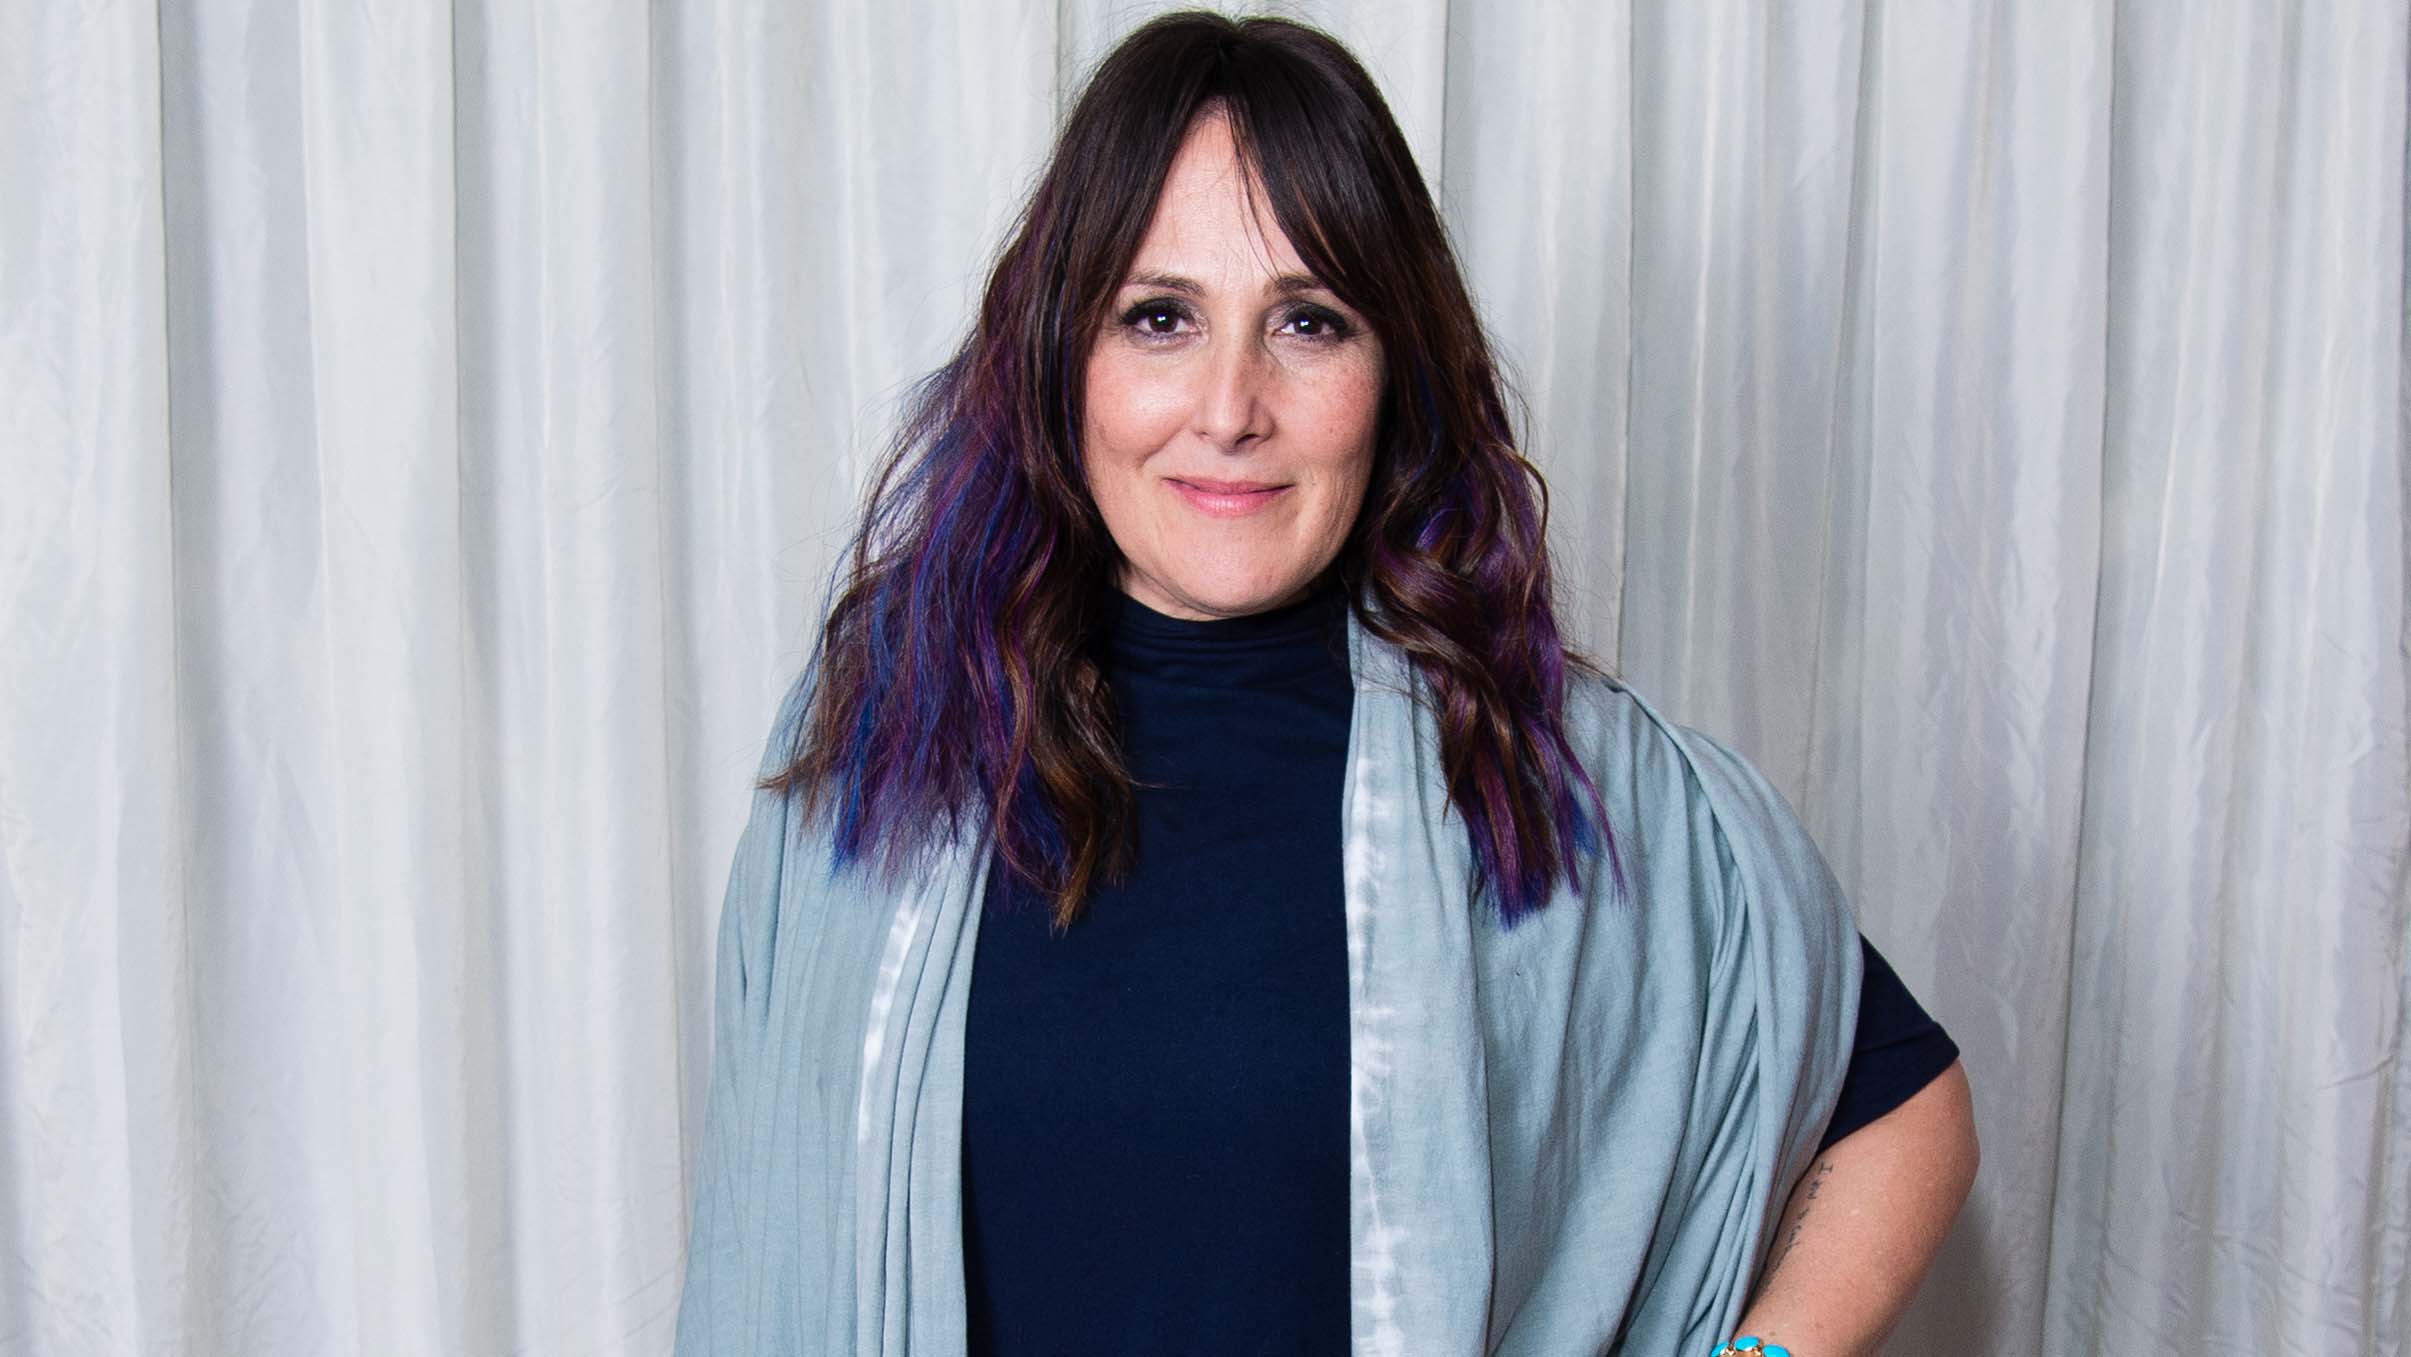 Ricki Lake Shaves Her Head After sharing Her Nearly 30-Year Struggle With Hair Loss